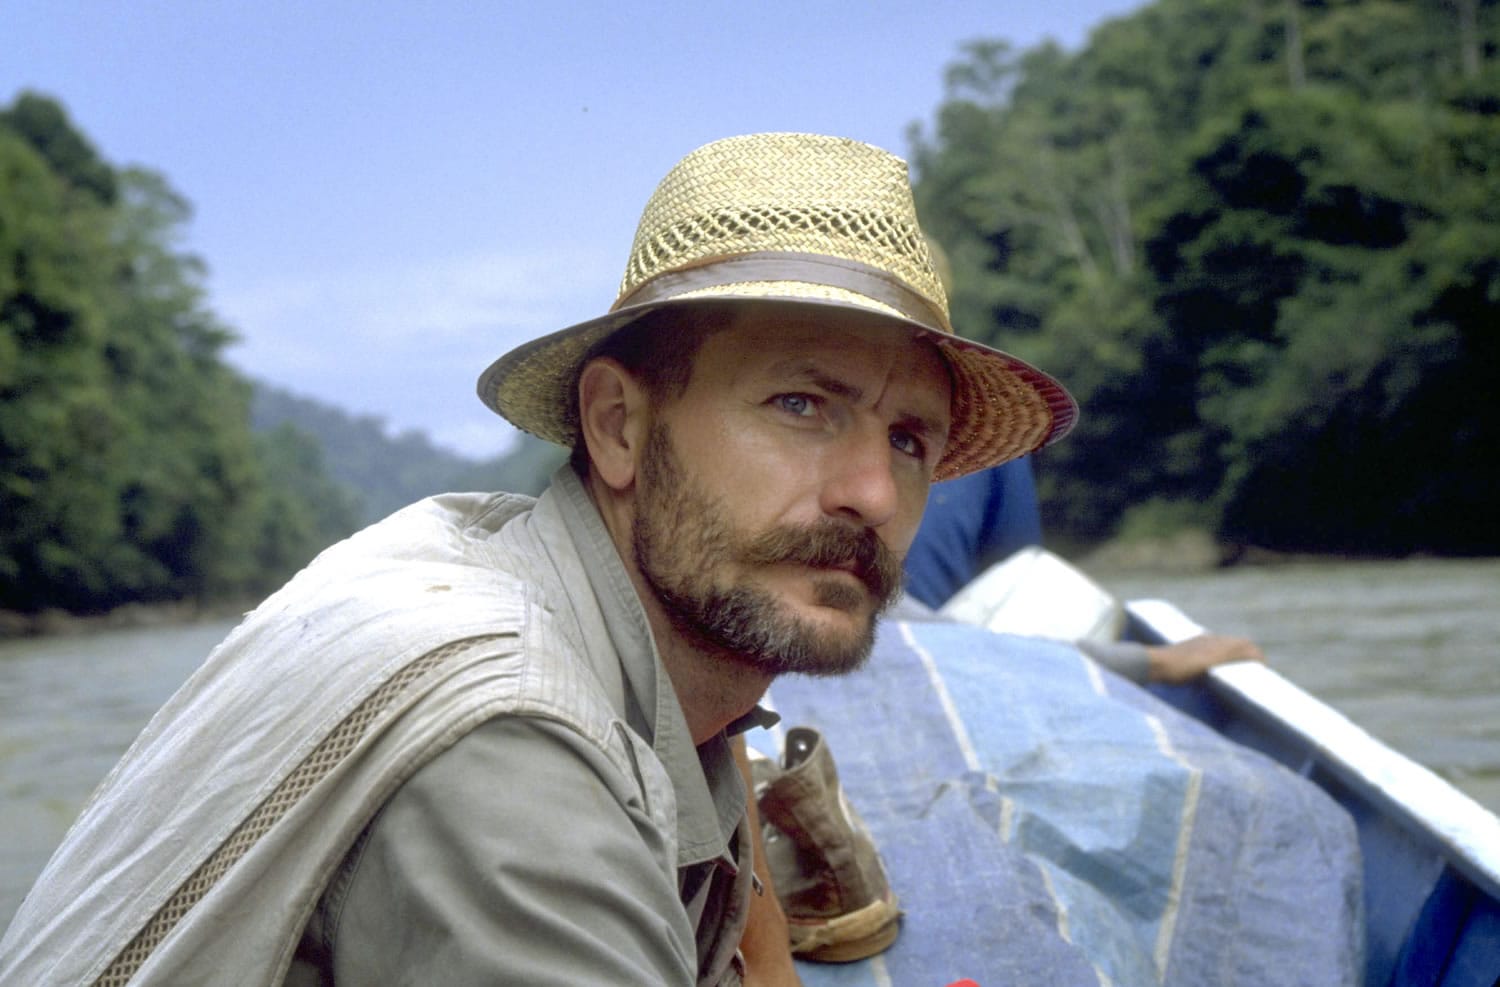 Pelton travels by boat along the Sembakung river on the island of Borneo, Indonesia, in 1996.